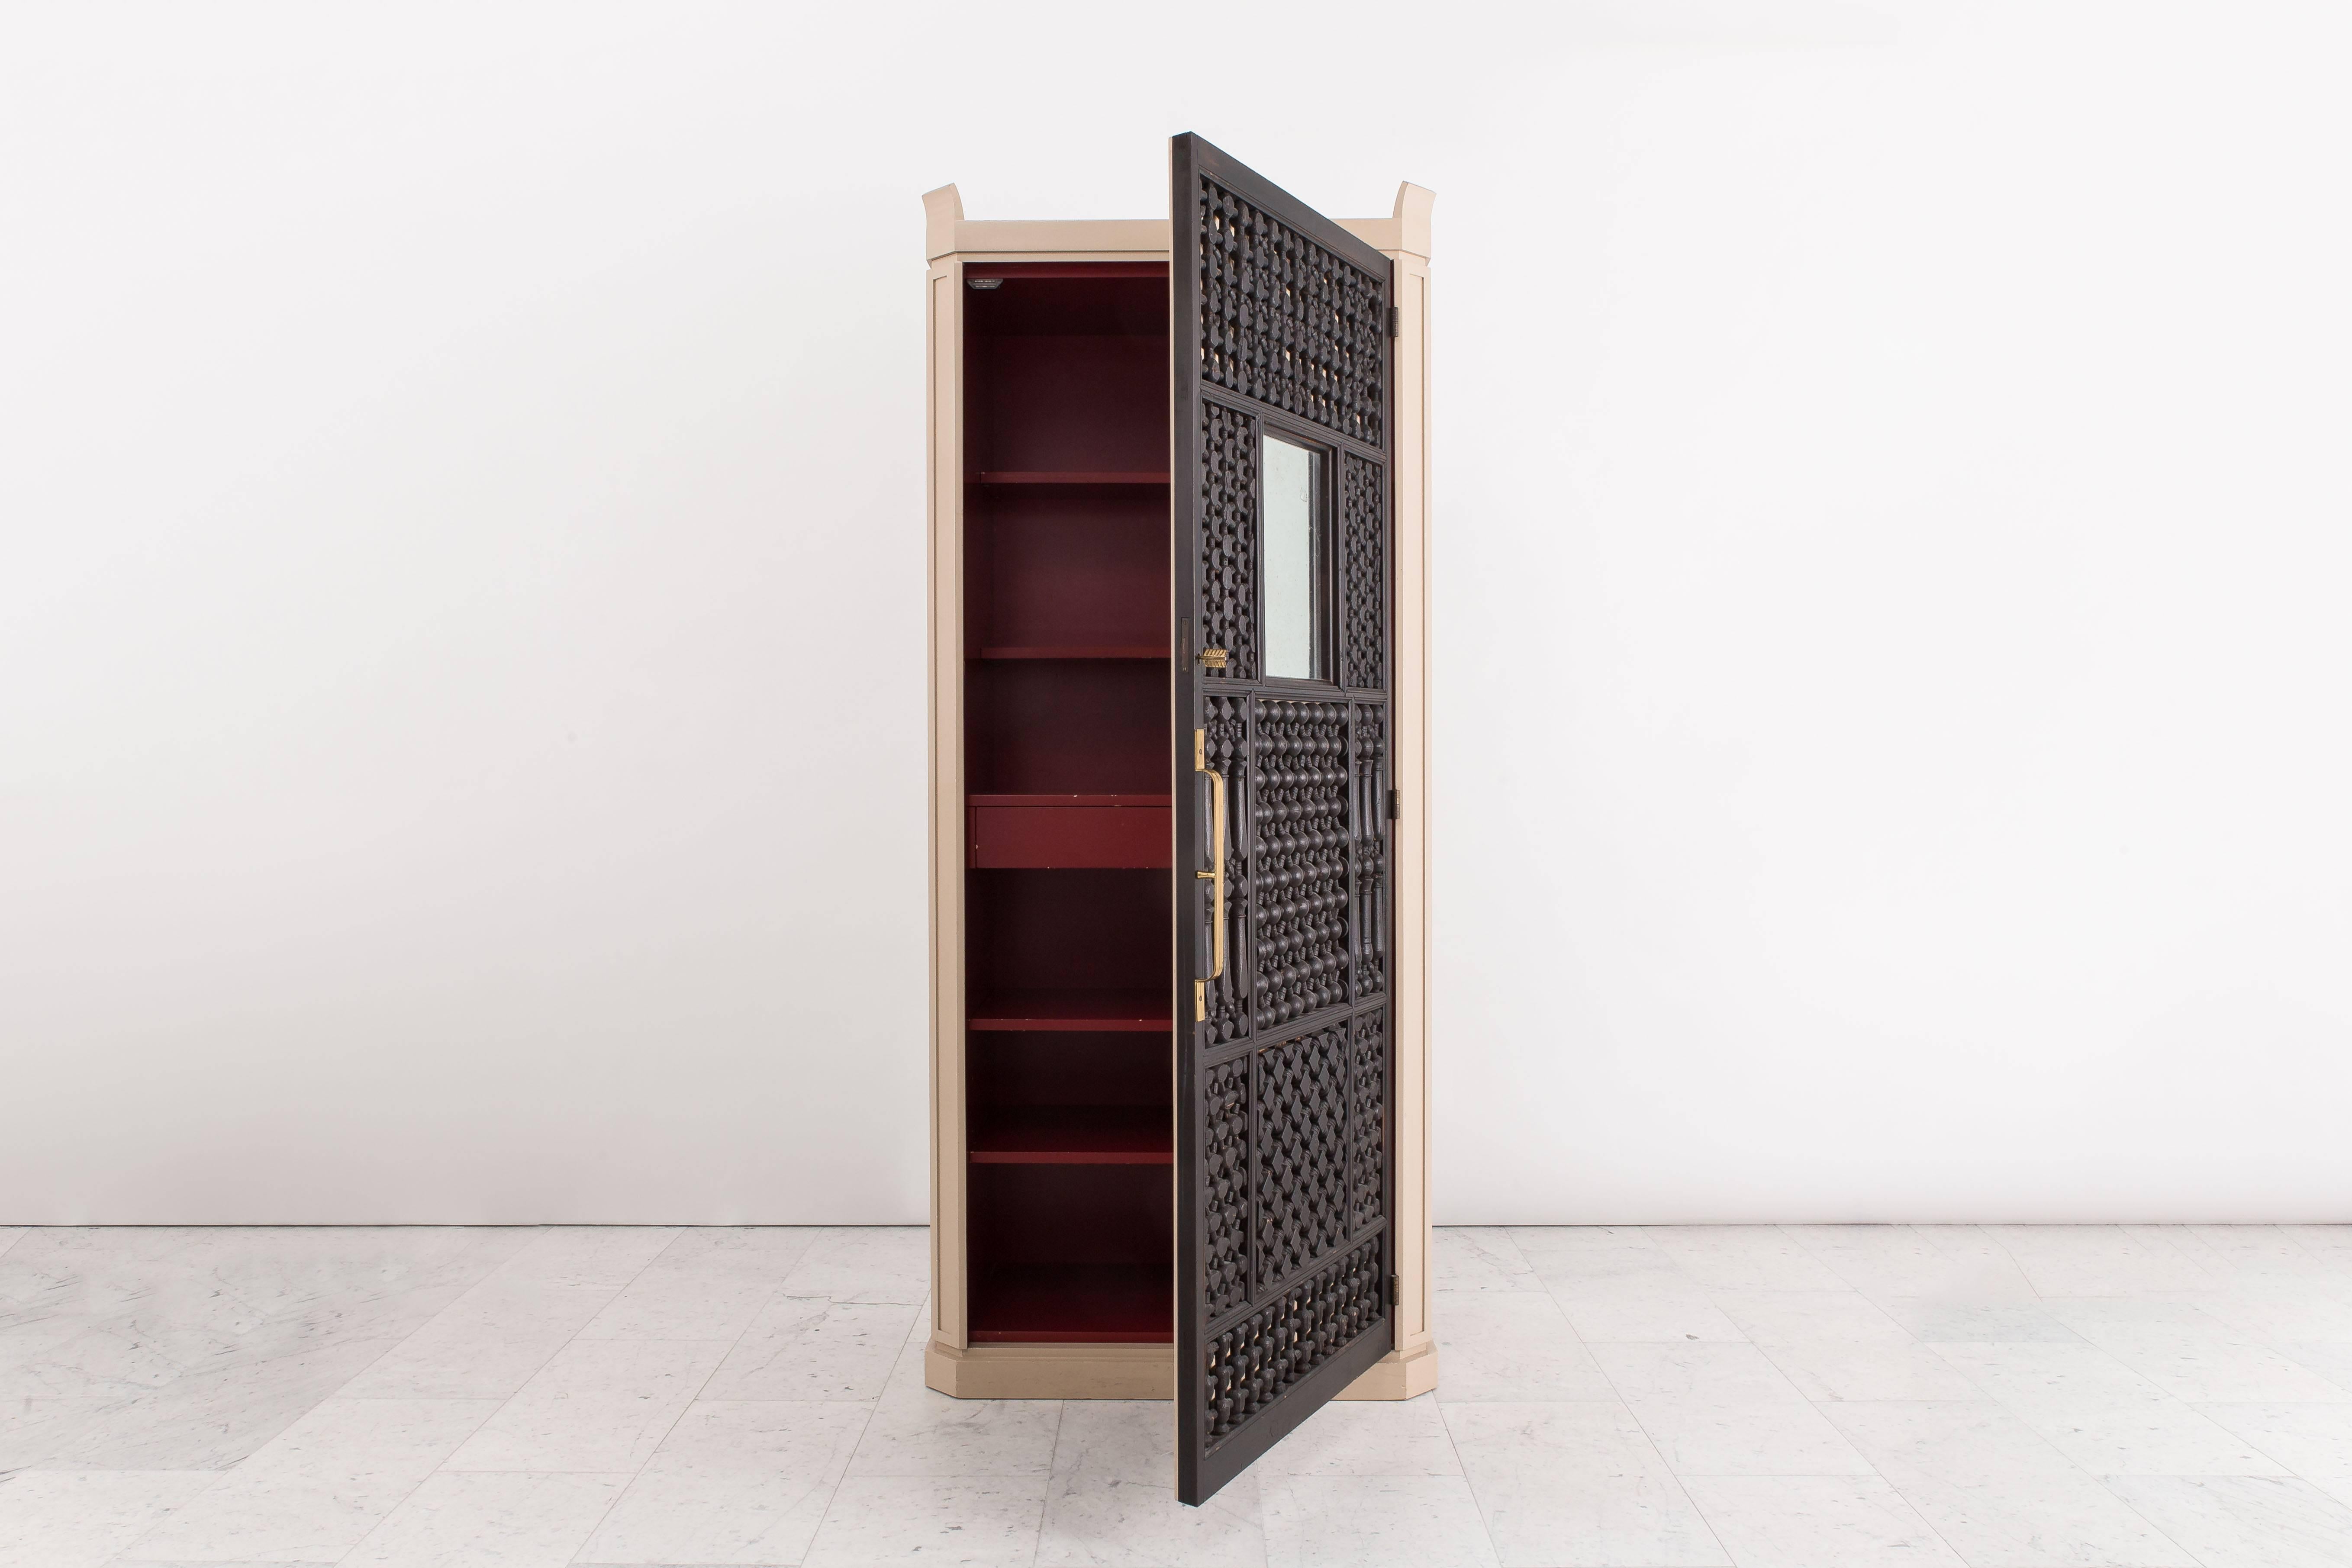 An entirely original cabinet or bar designed and produced by Tommi Parzinger in the early 1950s, this beautiful piece comes from his second show room that was located at 32 East 57th Street in Manhattan.

The tall cabinet, made with clean, modern